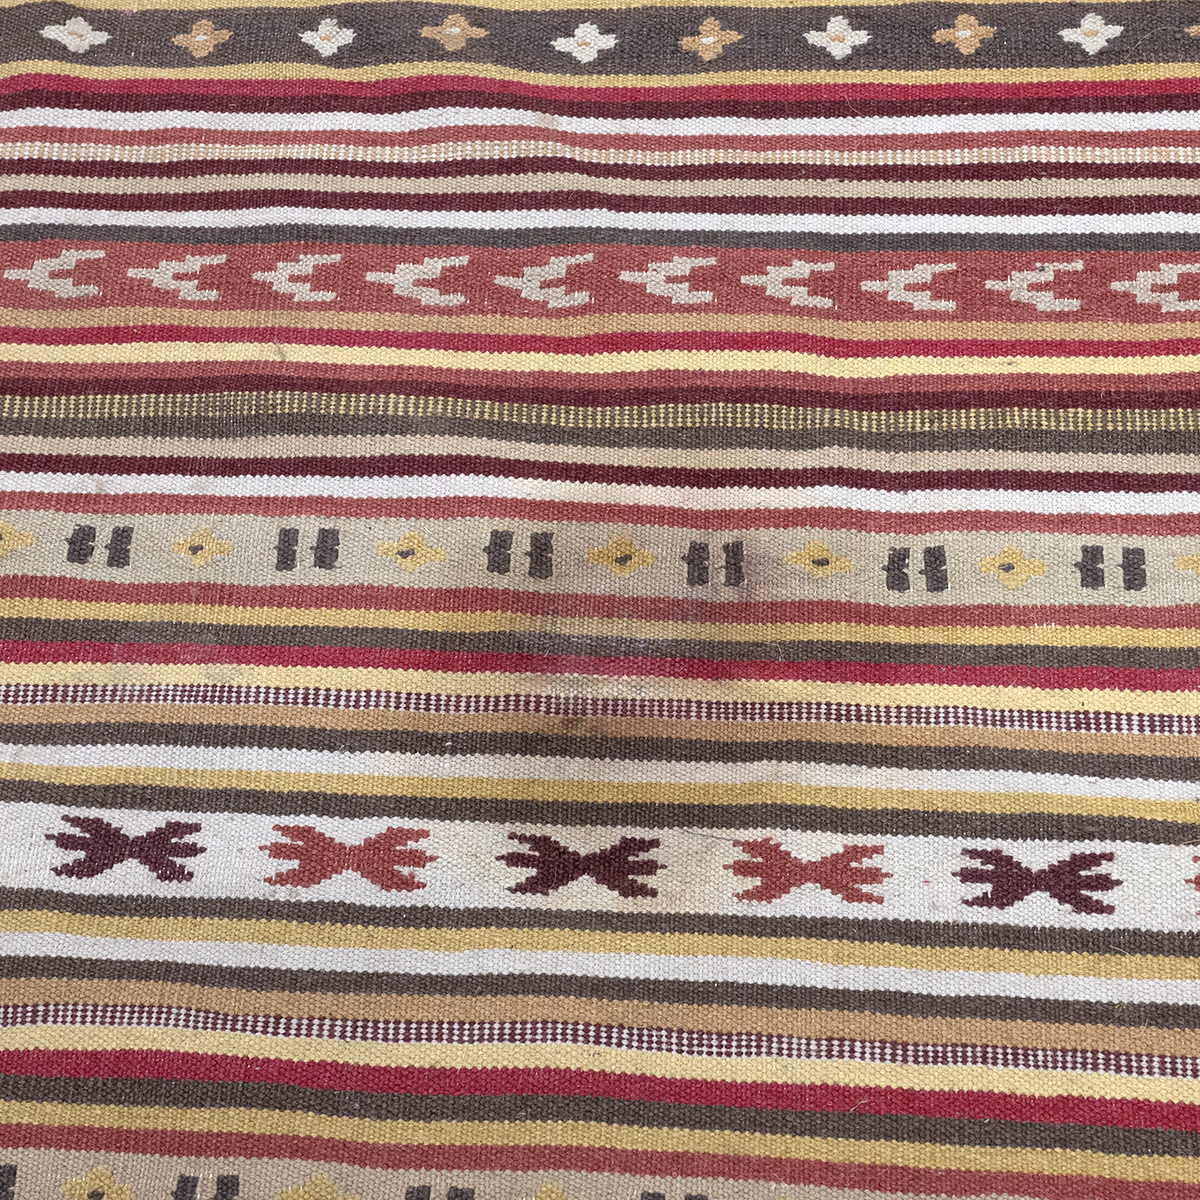 Vintage kilim rug, hand-knotted with a multi-coloured ground, with repeating patterns throughout.... - Image 2 of 3